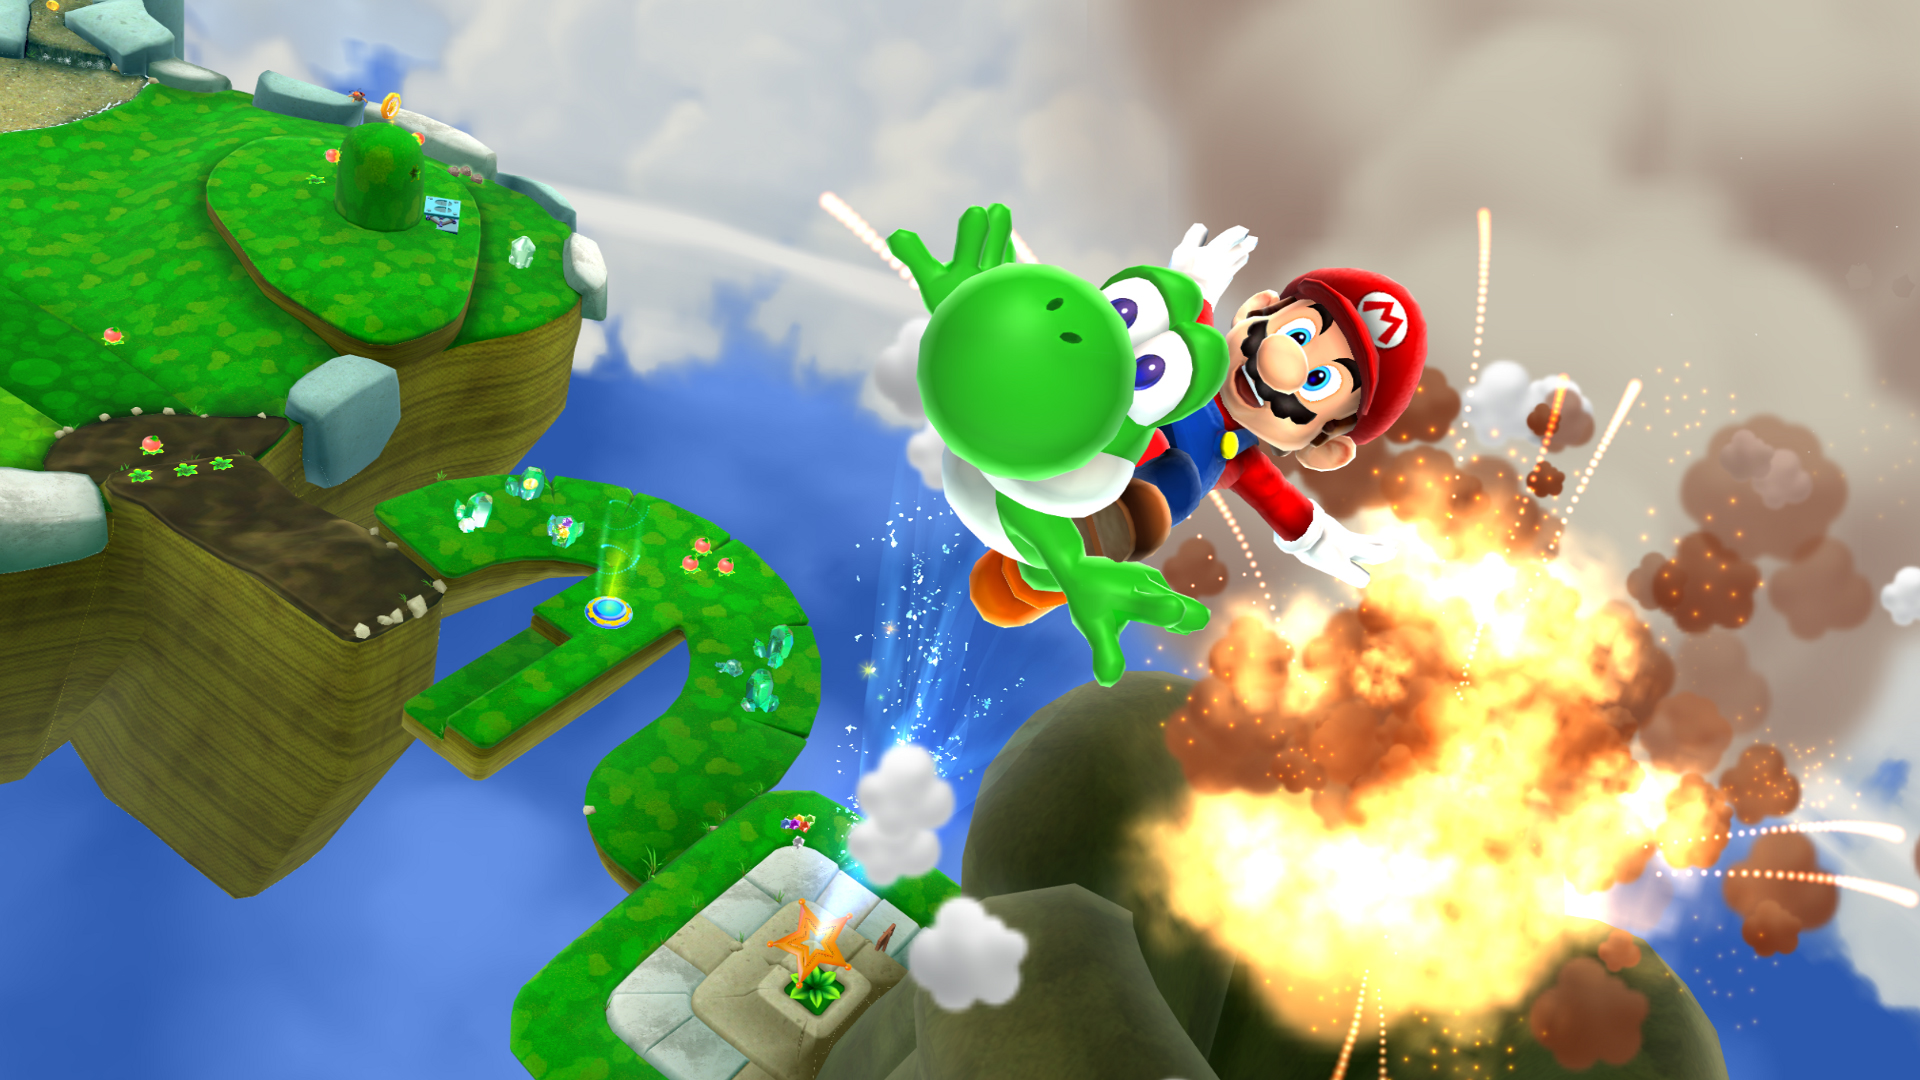 The Super Mario series is now synonymous with innovation, just like Super Mario Galaxy.